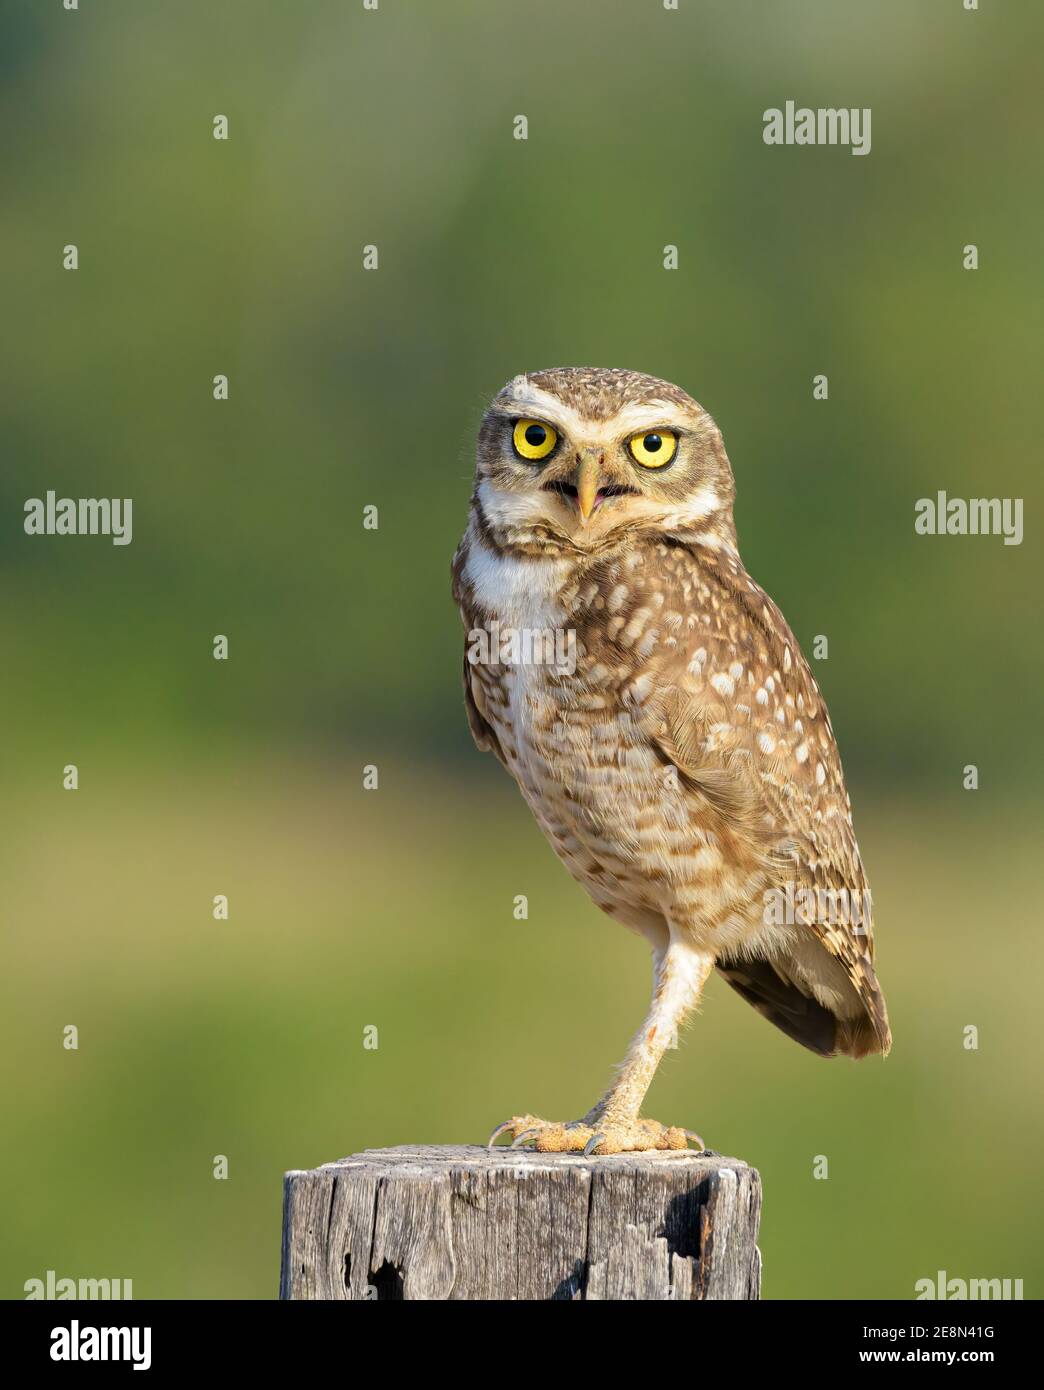 Burrowing Owl perched on post, soft green background, Stock Photo